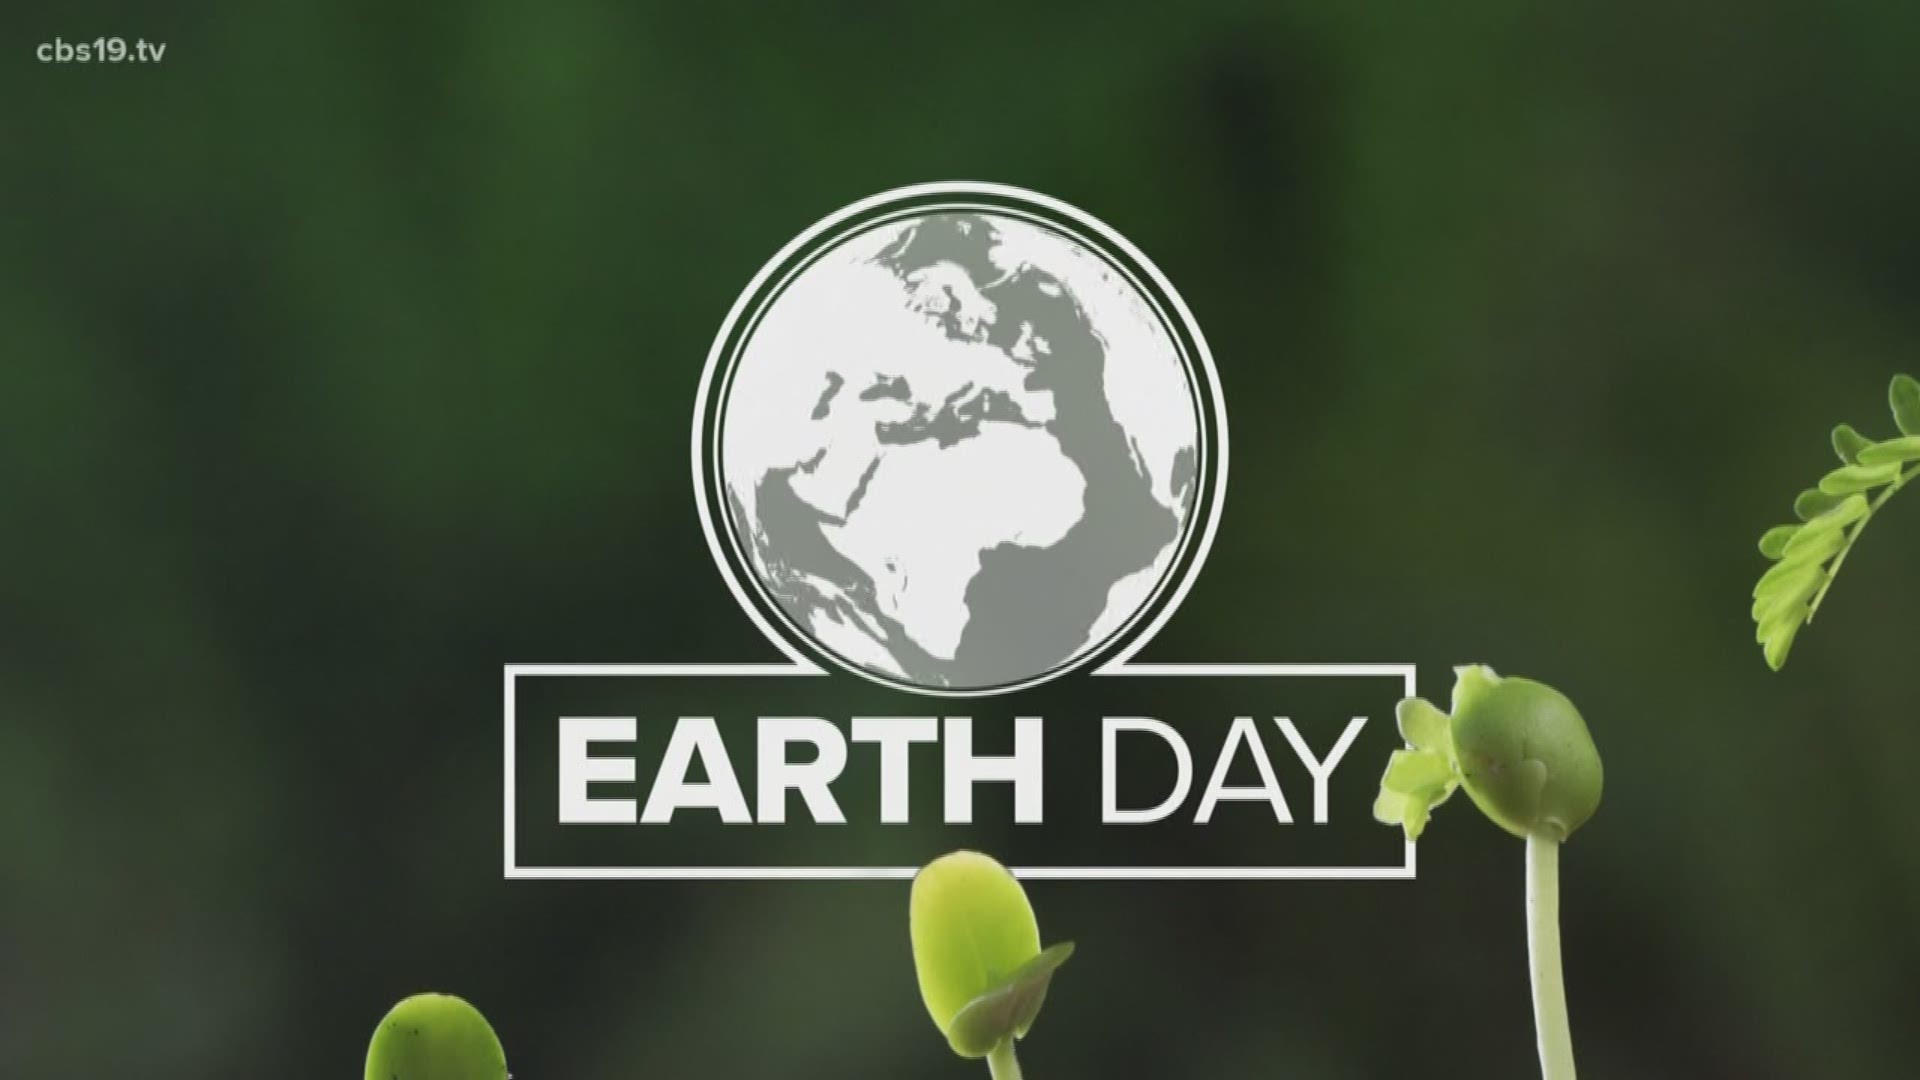 CBS19 takes a look at a local initiative to clean up Smith County, as well as some food for thought about climate change.